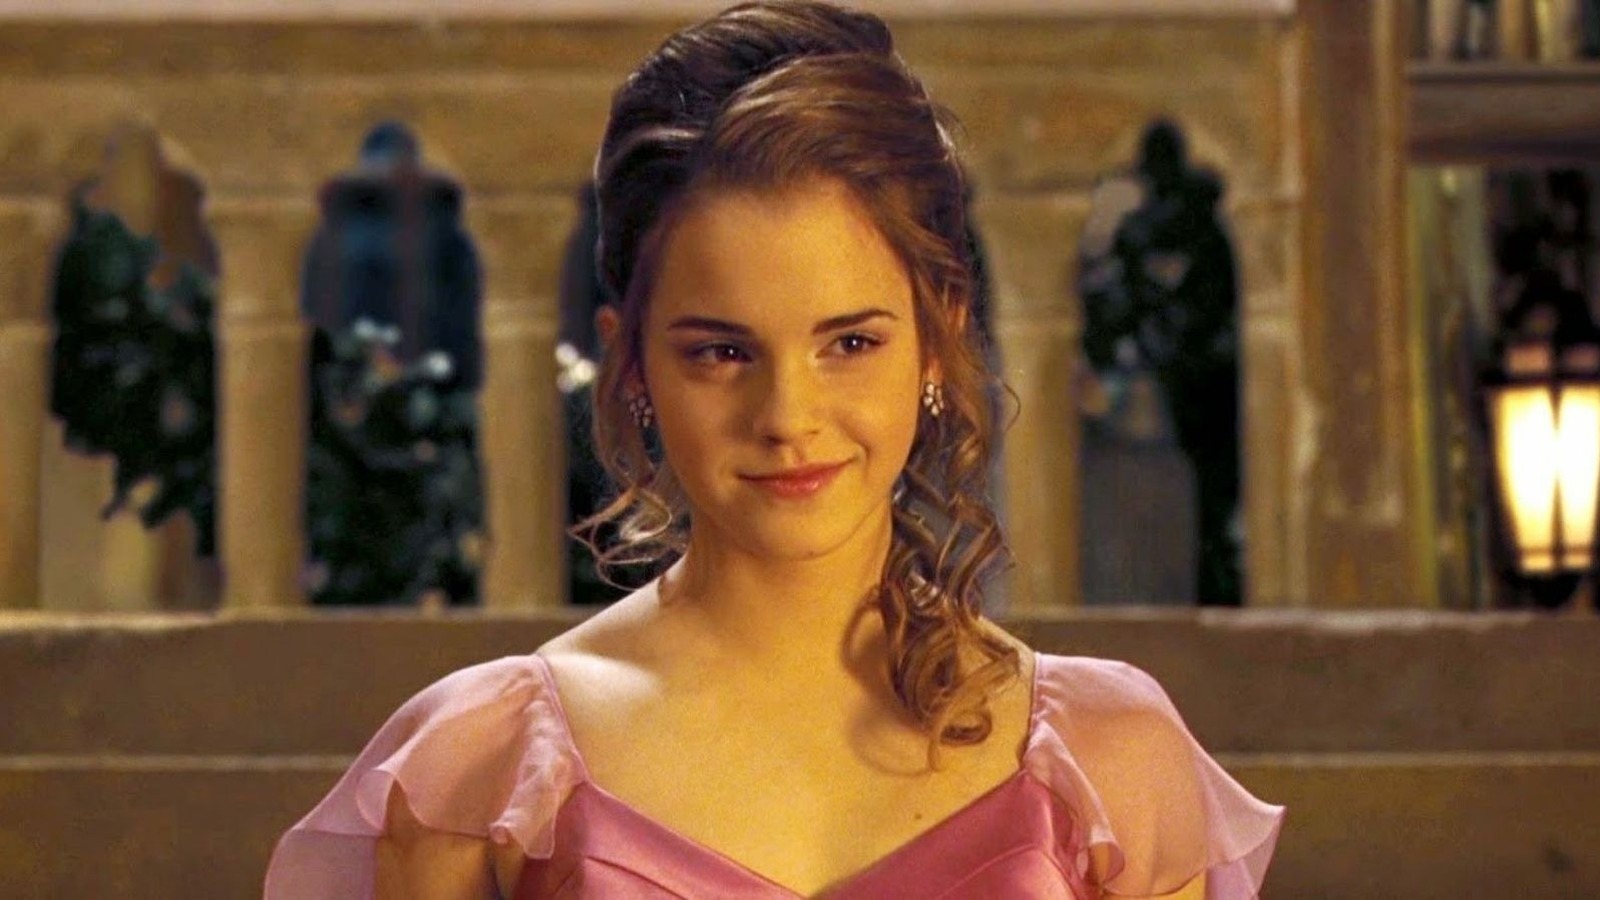 Hermione's rival